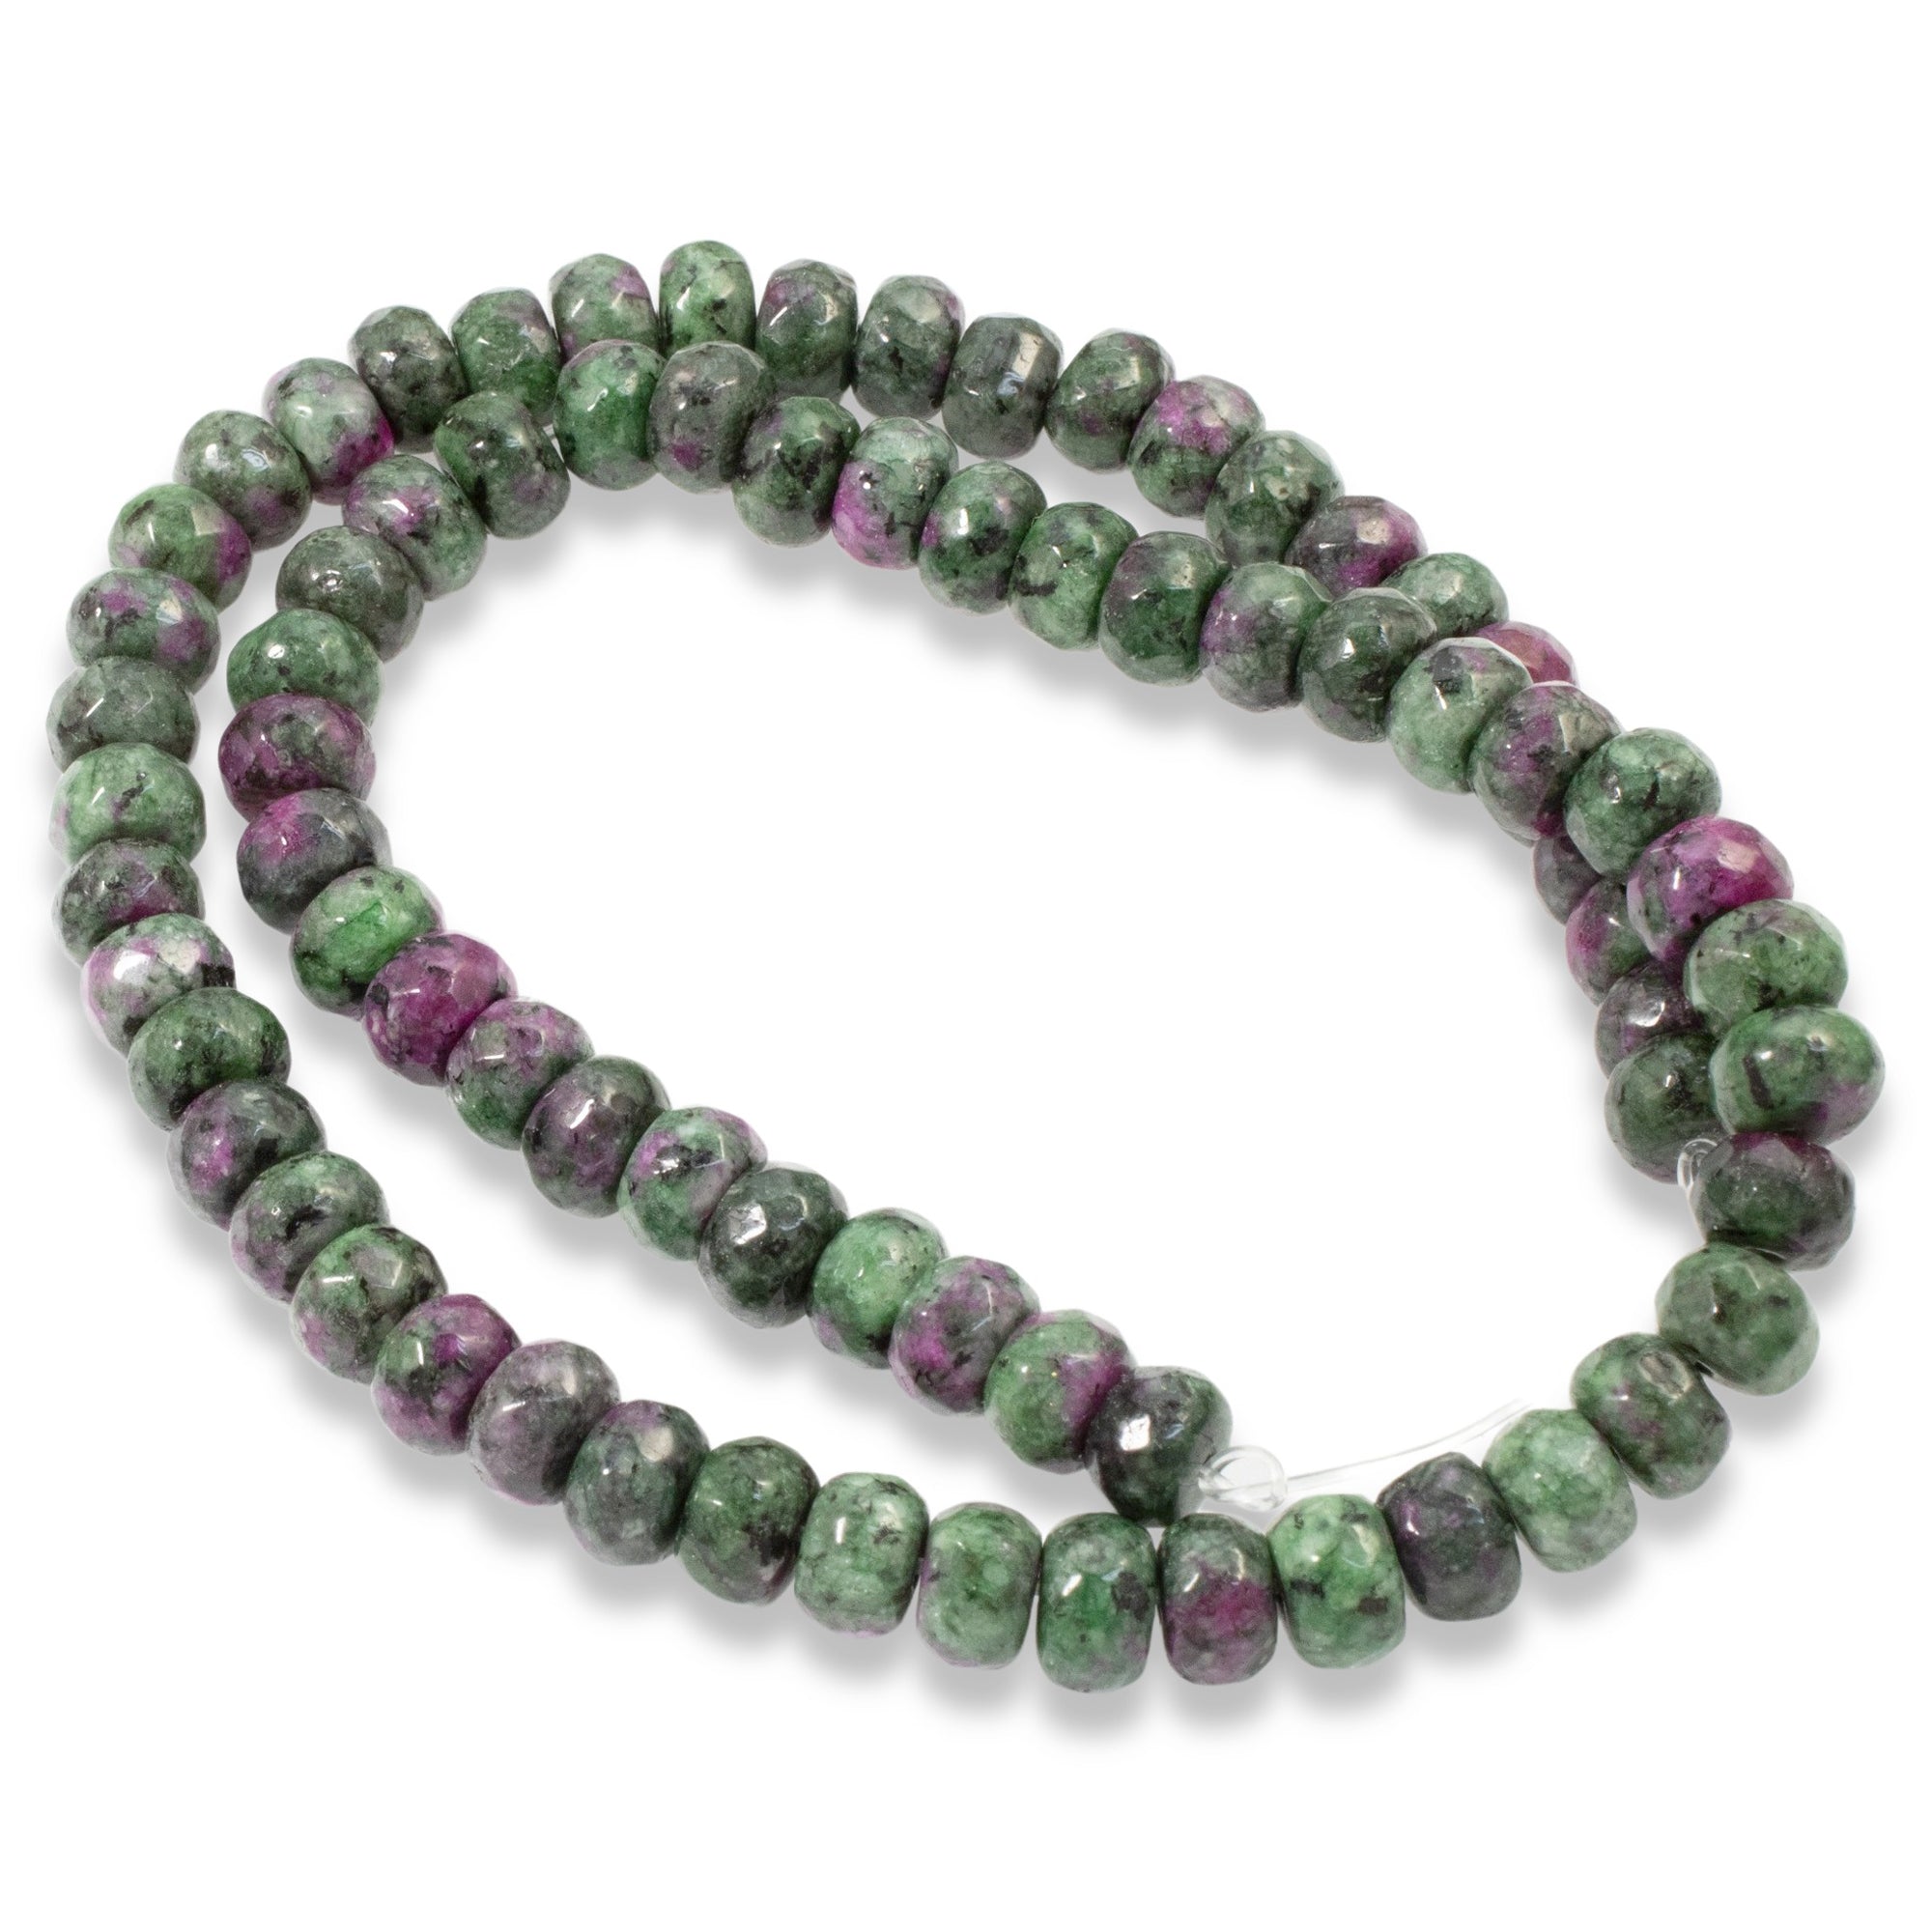 Ruby Zoisite 9.5-11.5mm Faceted Rondelle A Grade Gemstone Beads Lot - 154976